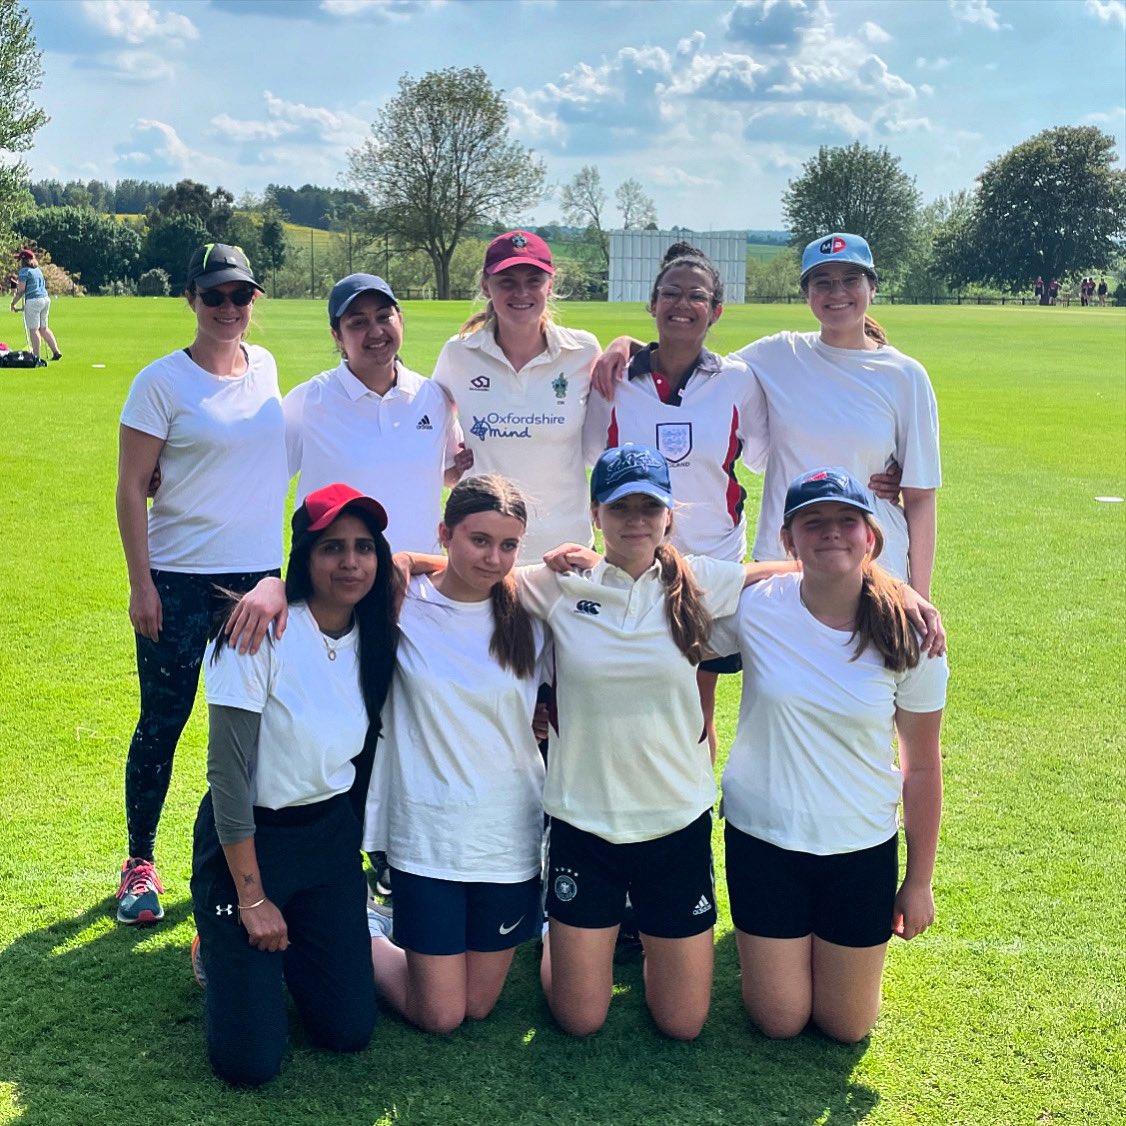 The history makers! Didcot Spirit played their first ever games of hardball cricket and smashed it! 
The score didn’t go our way in the second game against a strong Steventon side but we had a nail-biting first game against East and West Hendred, losing by 1 run!